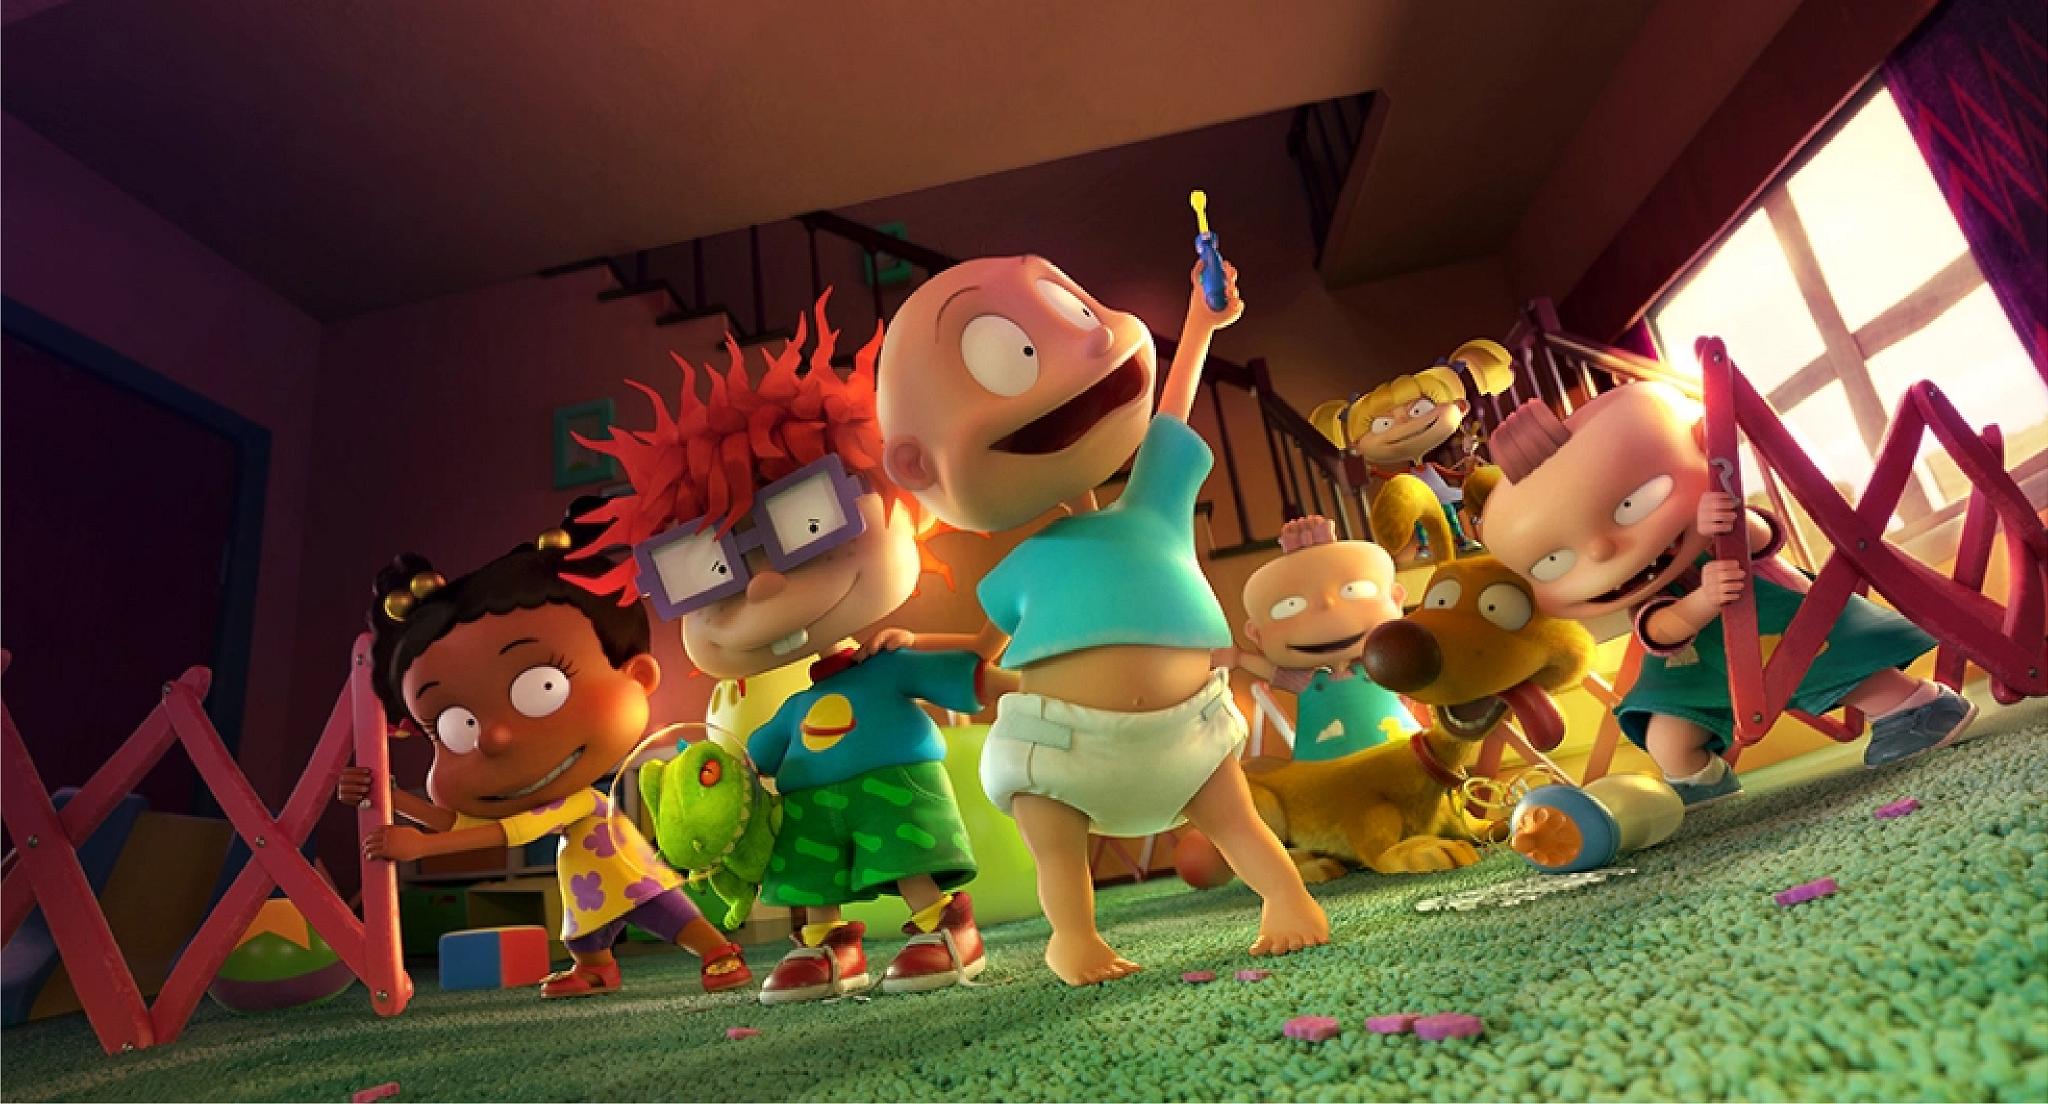 The Babies Are Back In An All-New Rugrats Trailer From Paramount+